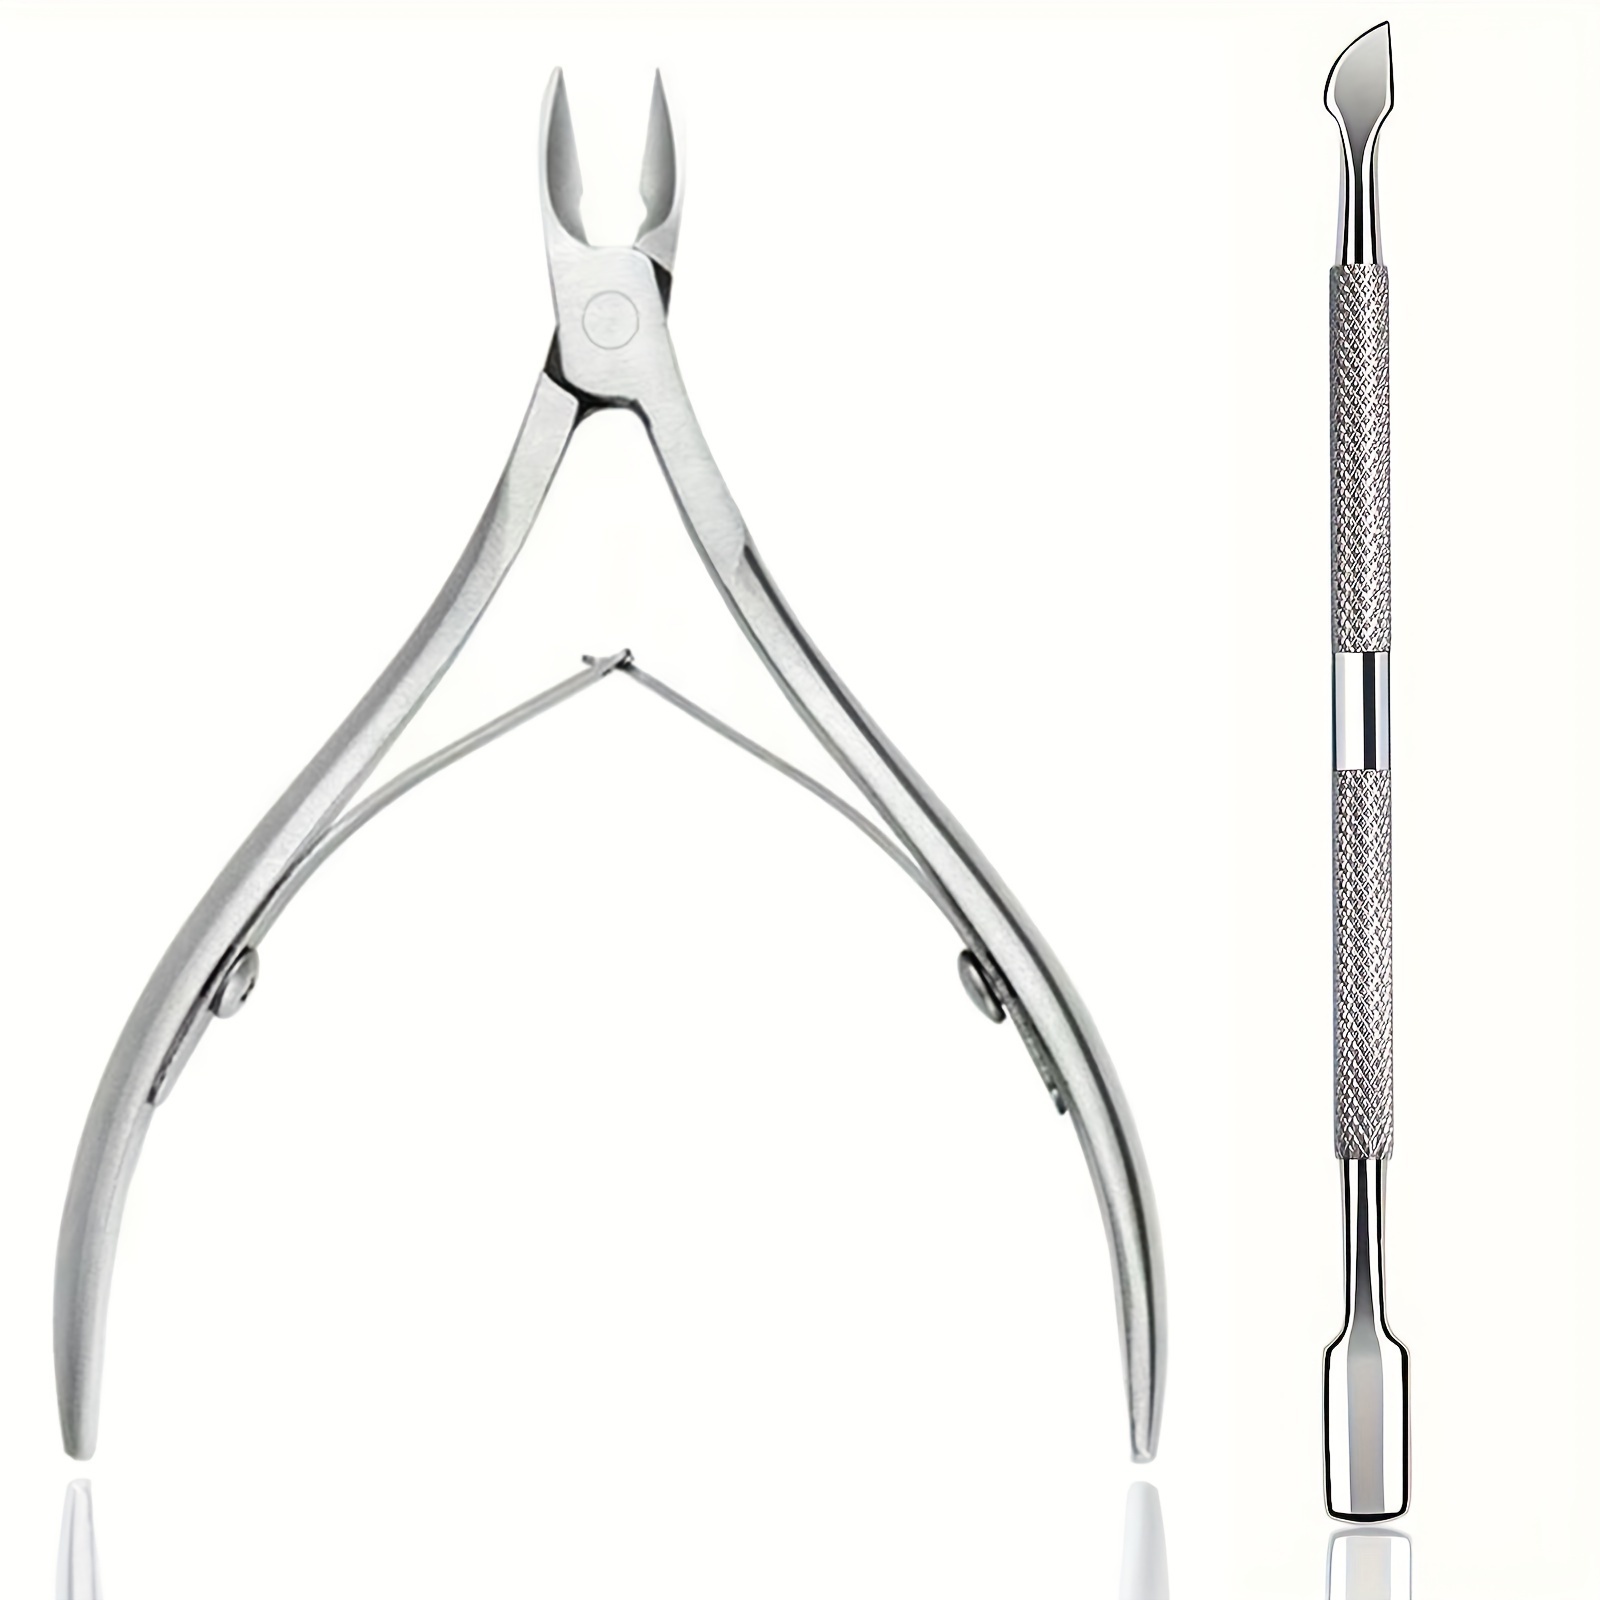 

2-piece Set, Stainless Steel Cuticle Nipper And Pusher, Classic Silver Nail And Toenail Grooming Tools, Dead Skin Trimmer And Remover Kit, Manicure And Pedicure Essentials